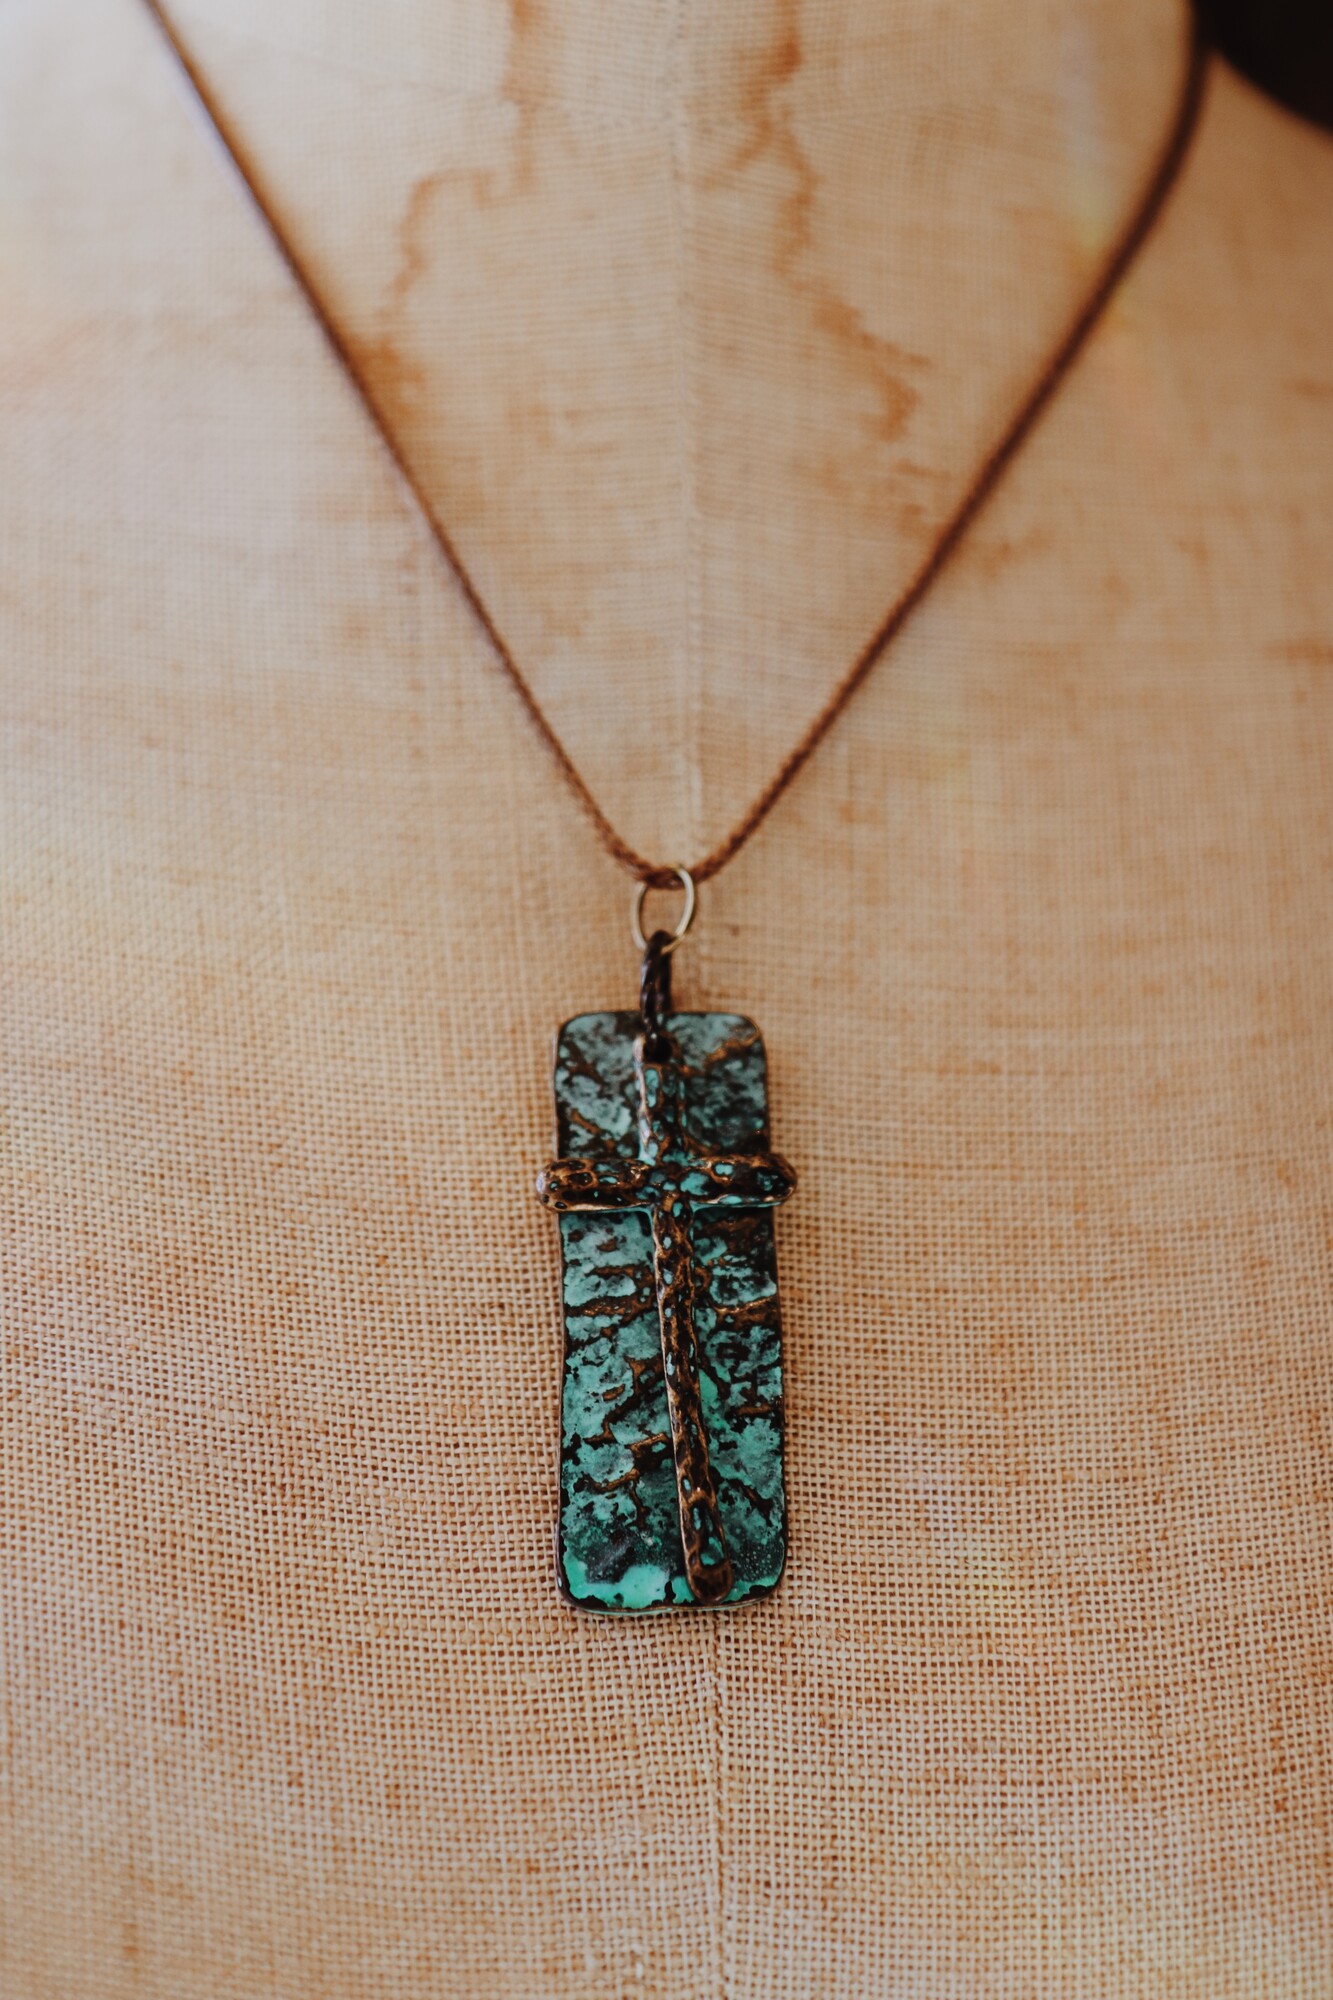 This Kelli Hawk Designs necklace is on a 17 inch cord with a 2 inch extender. The penant is a rustic teal metal plate with a cross infront of it!